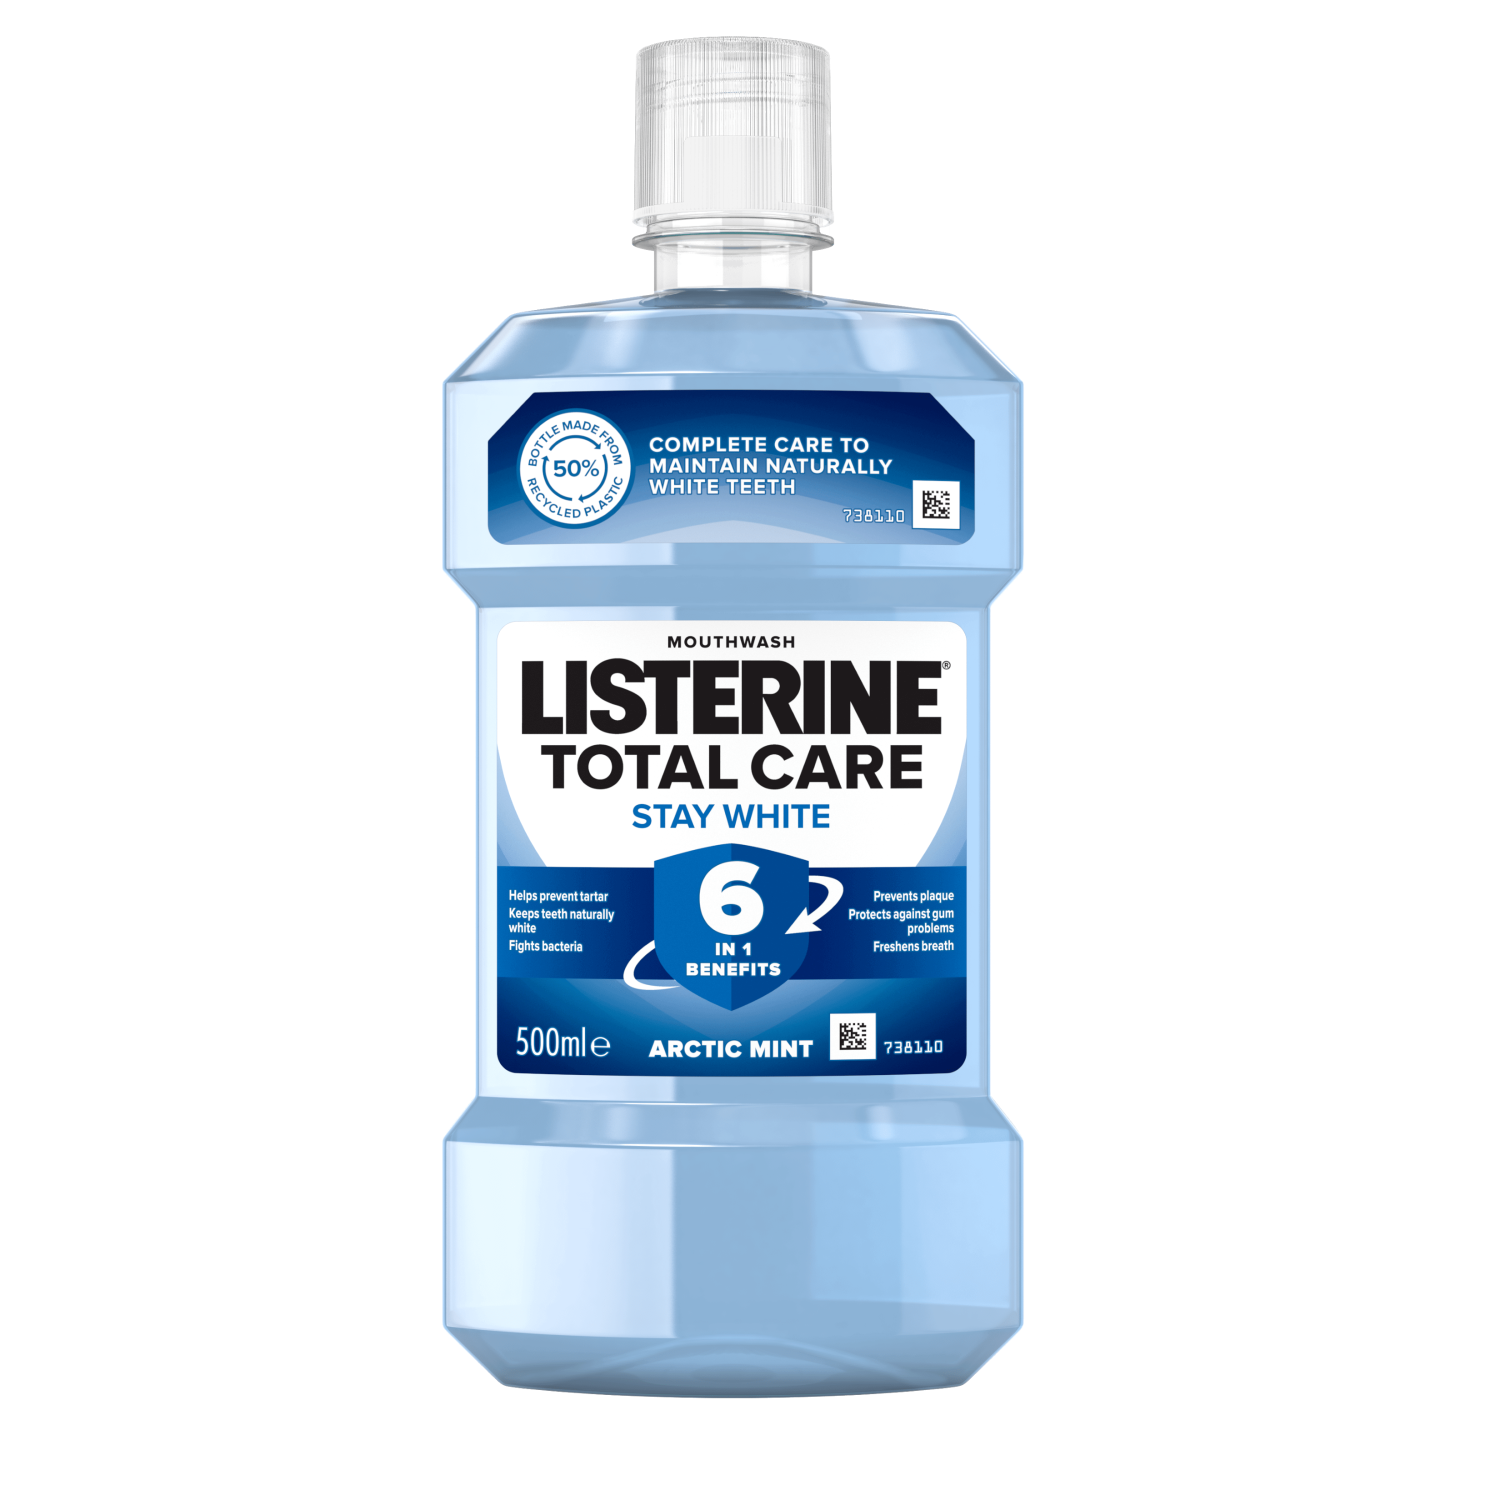 Listerine Total Care Stay White 6 benefits in 1 500 ml termékfotó, complete care to maintain naturally white teeth, helps prevent tartar, keeps teeth naturally white, fights bacteria, prevents plaque, protects against gum problems, freshens breath